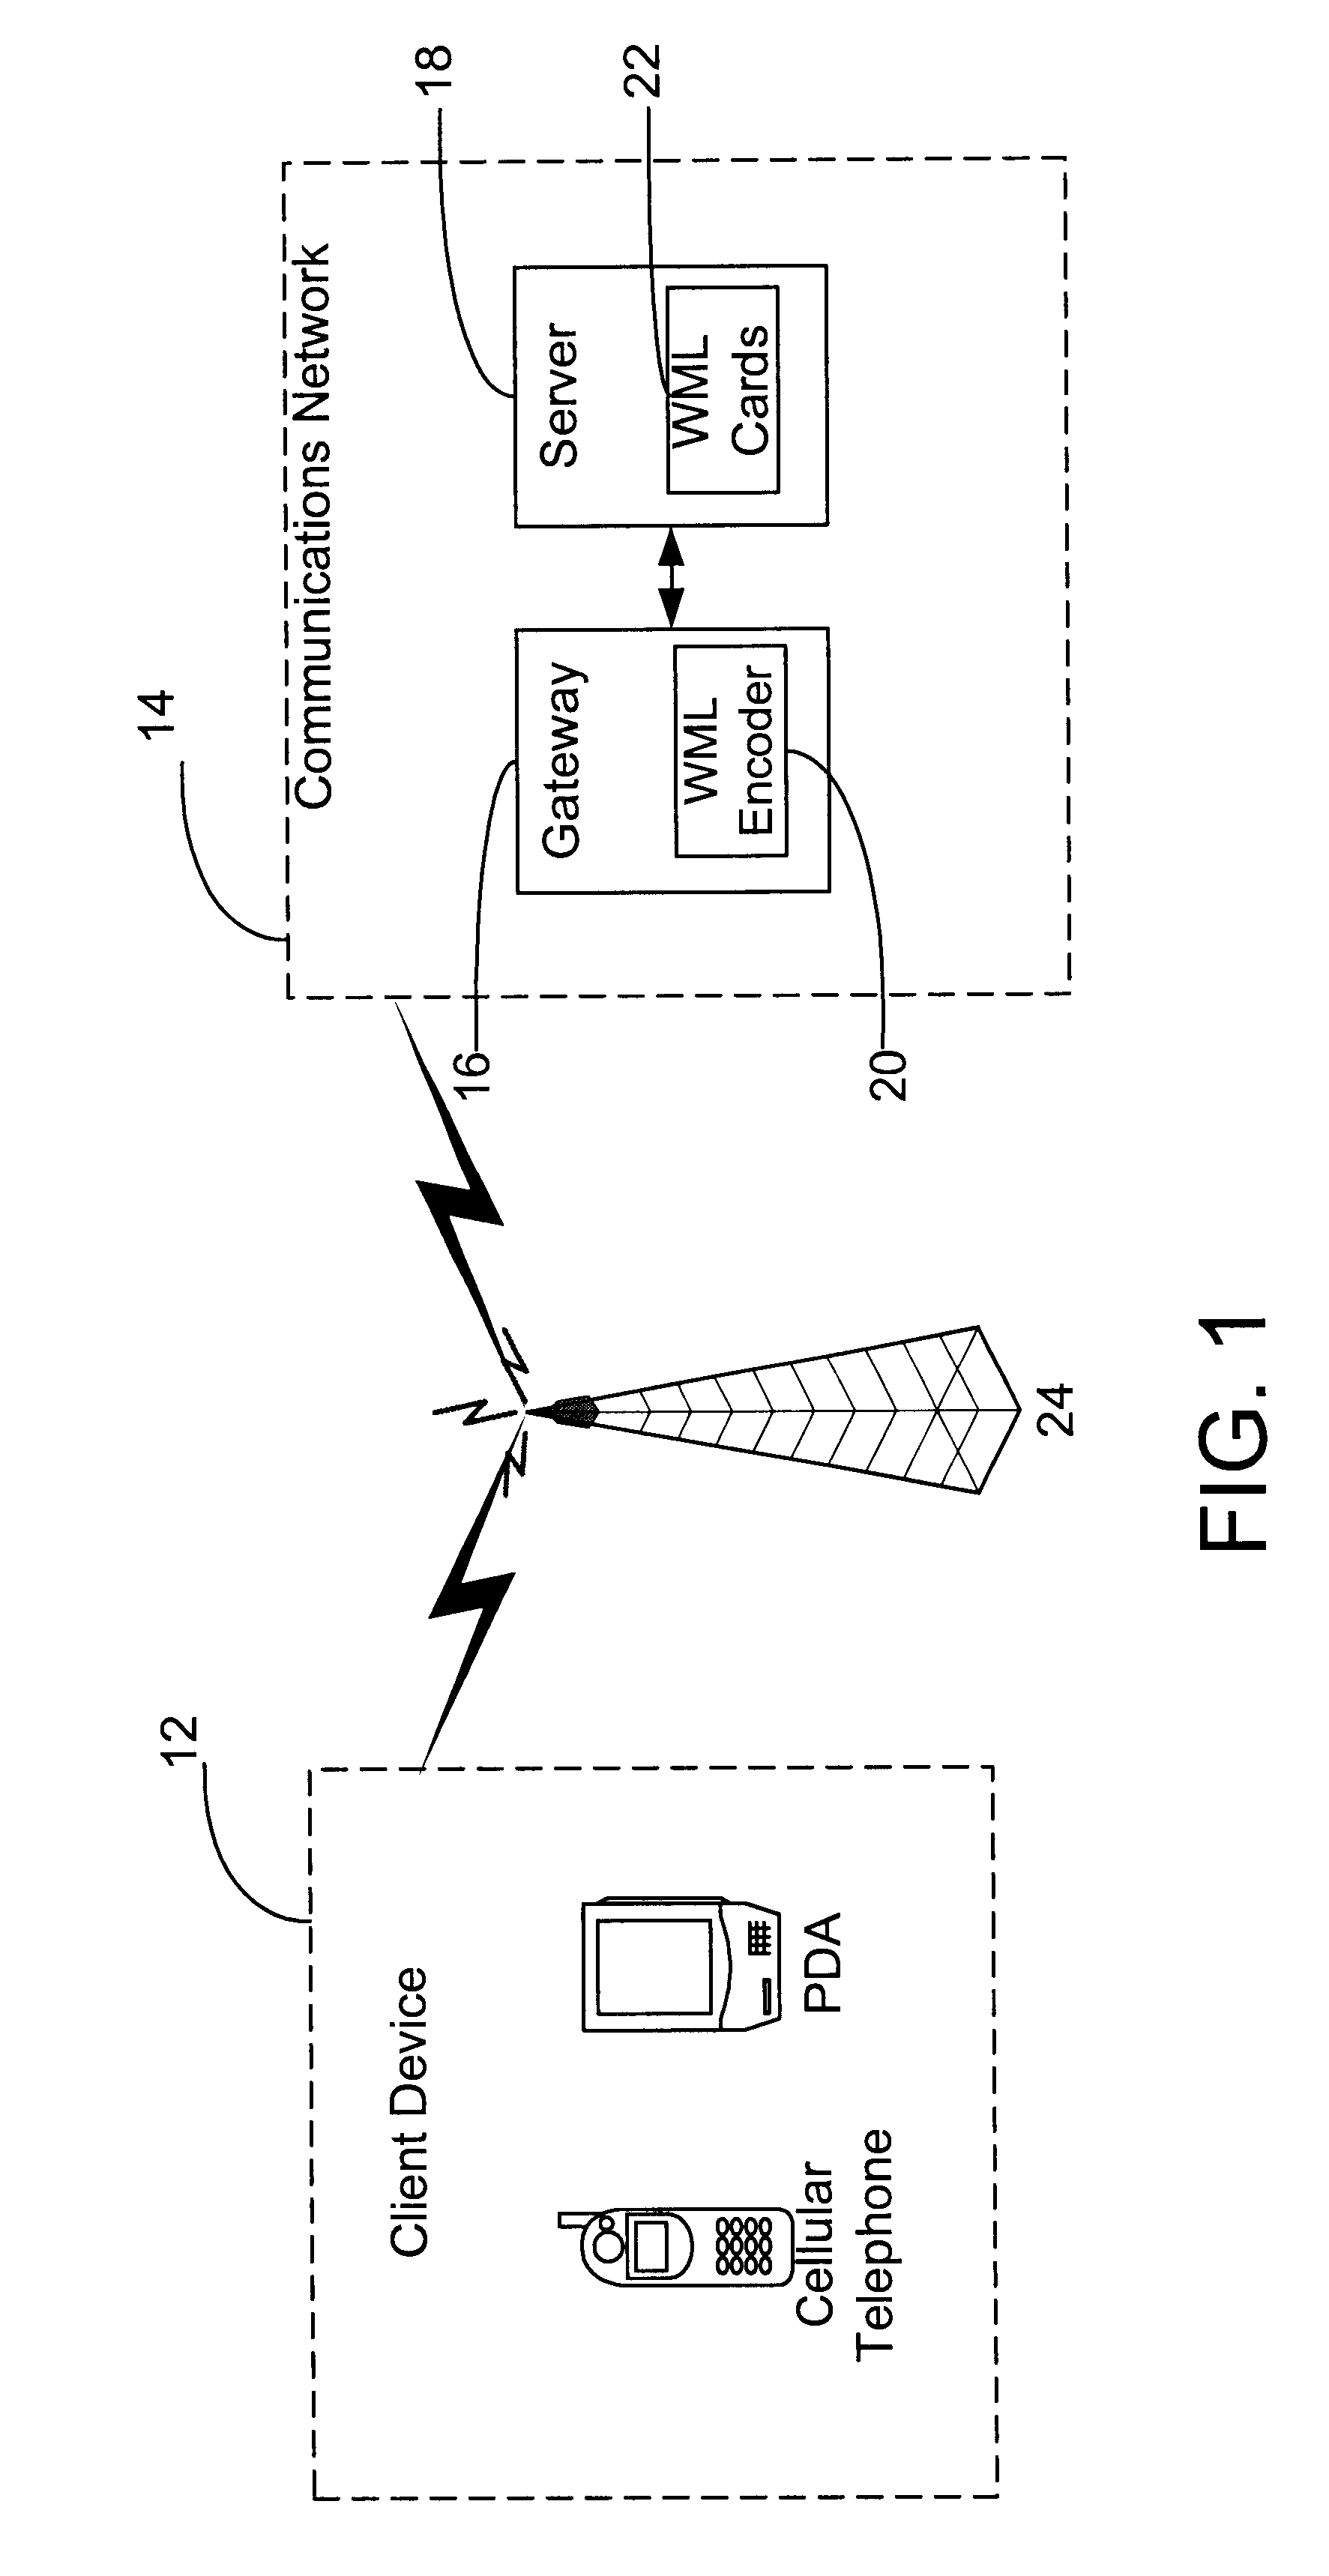 Method and system for assisting a user to engage in a microbrowser-based interactive chat session